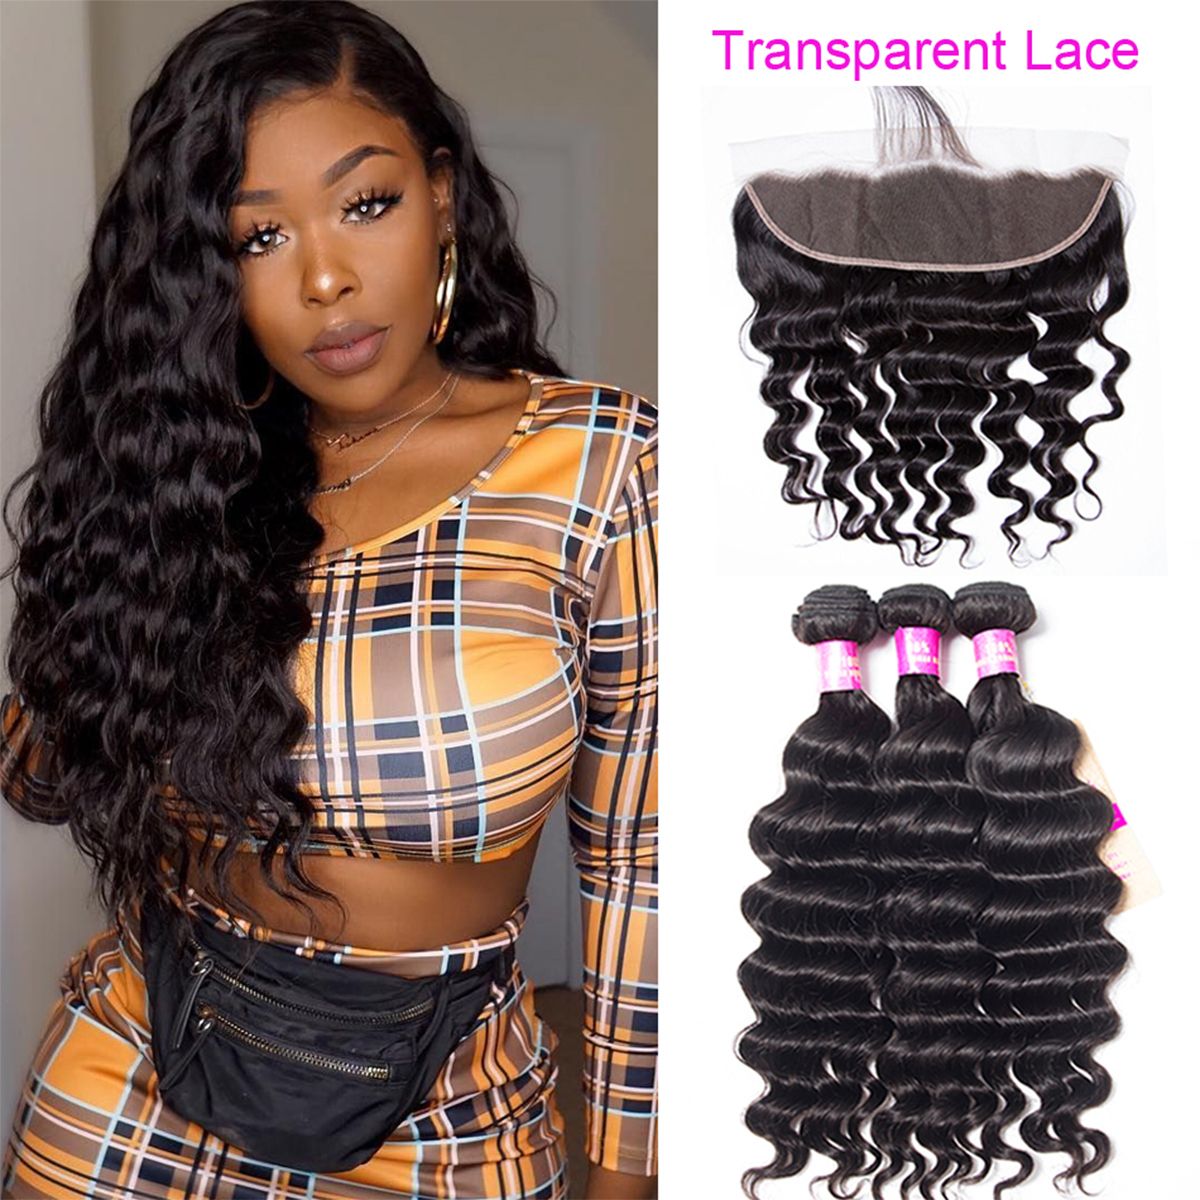 loose deep hair with transparent lace frontal